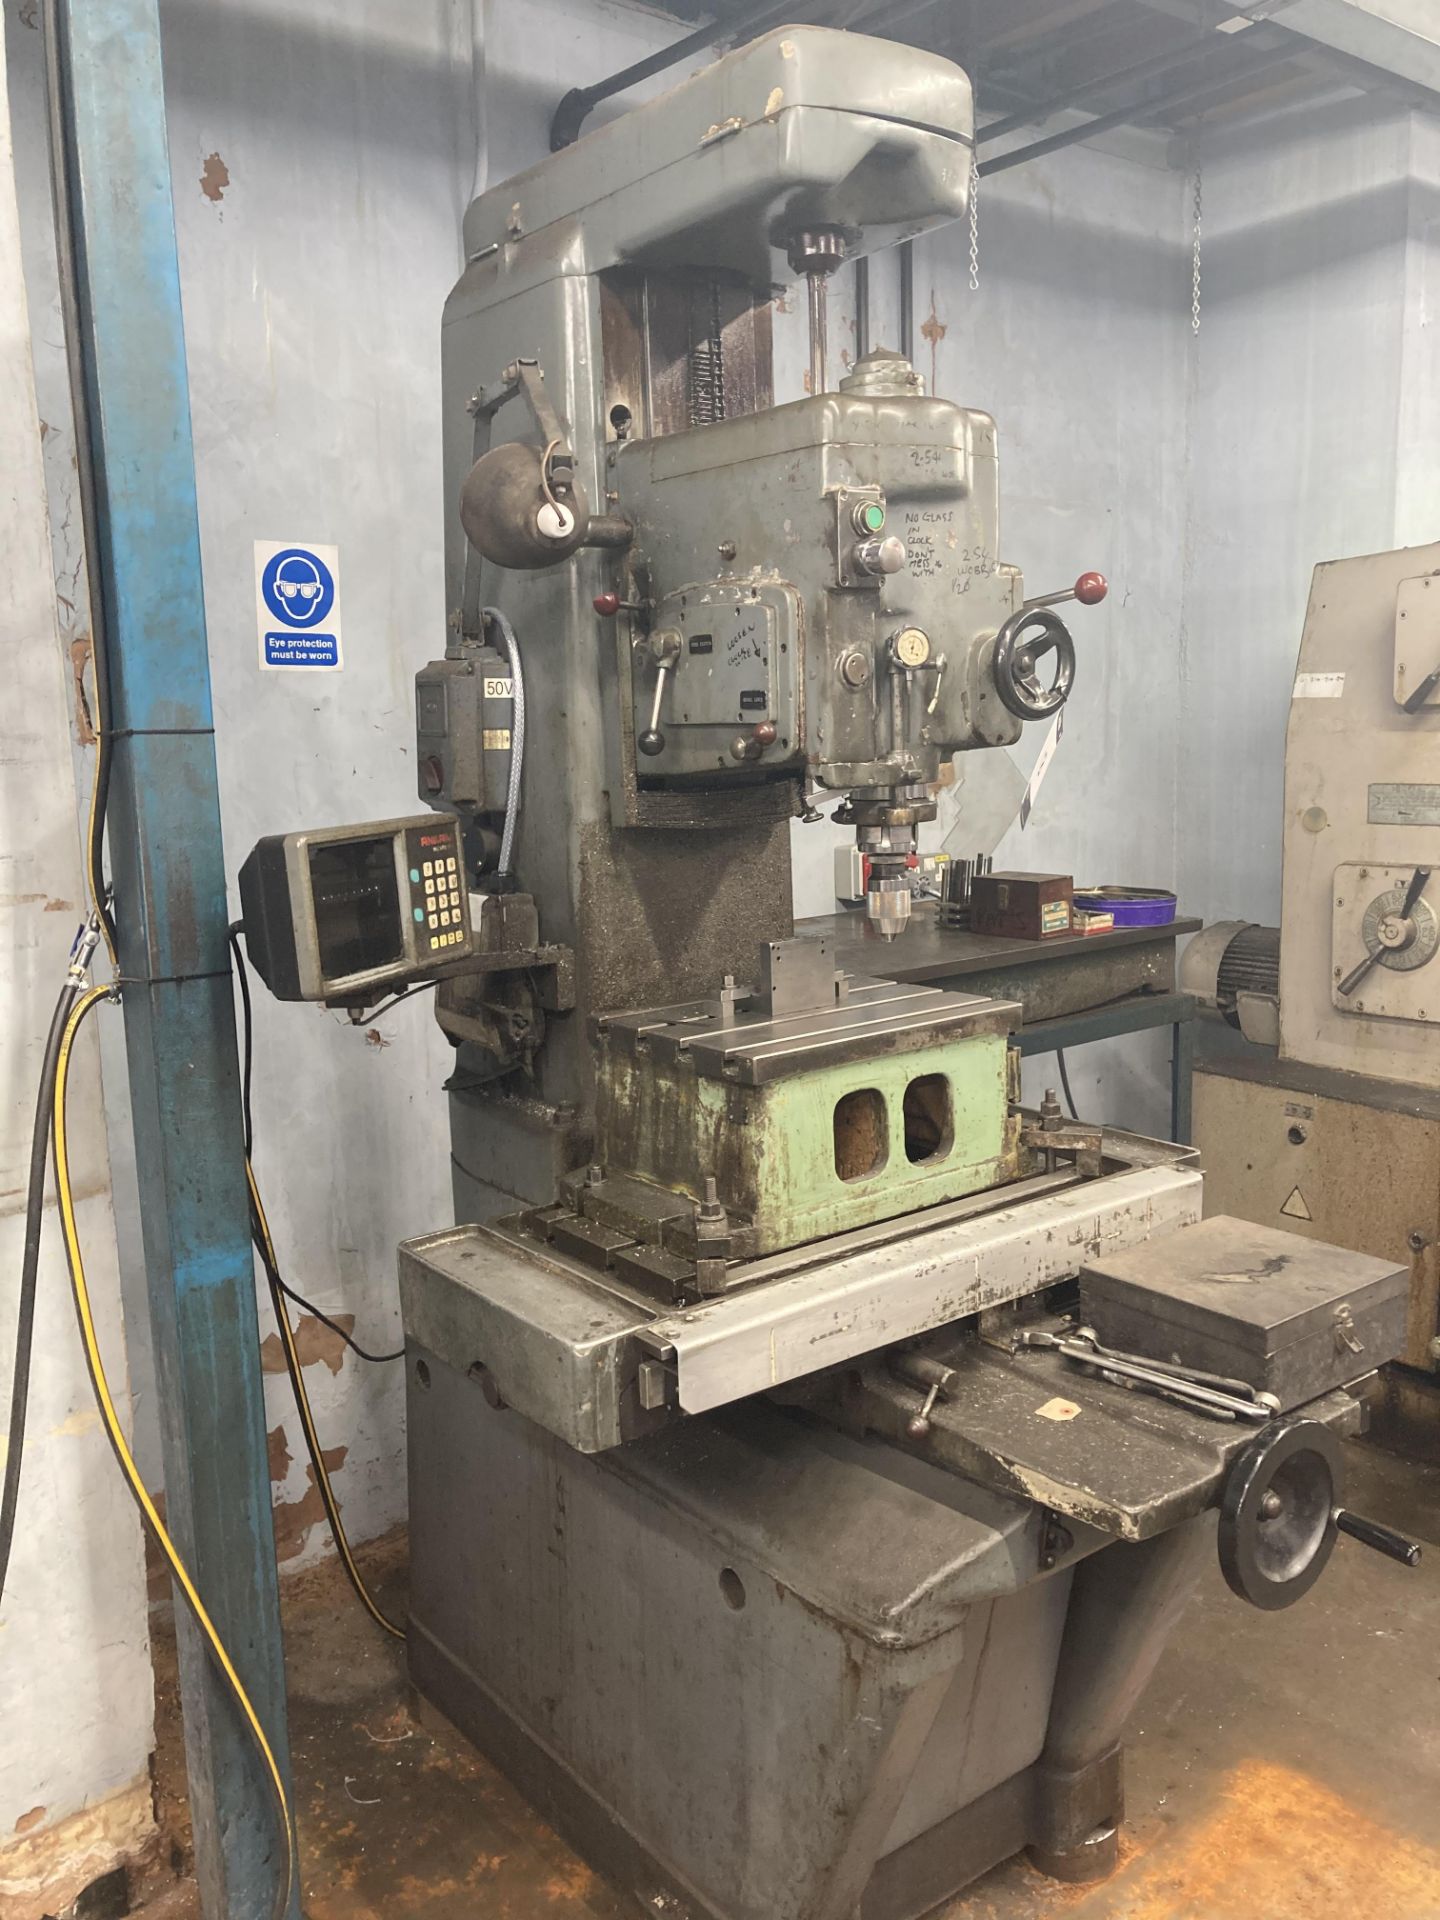 Elga vertical boring machine, Serial No. 5671-25, table size 600mm x 300mm, speeds 95-2070 with - Image 2 of 6